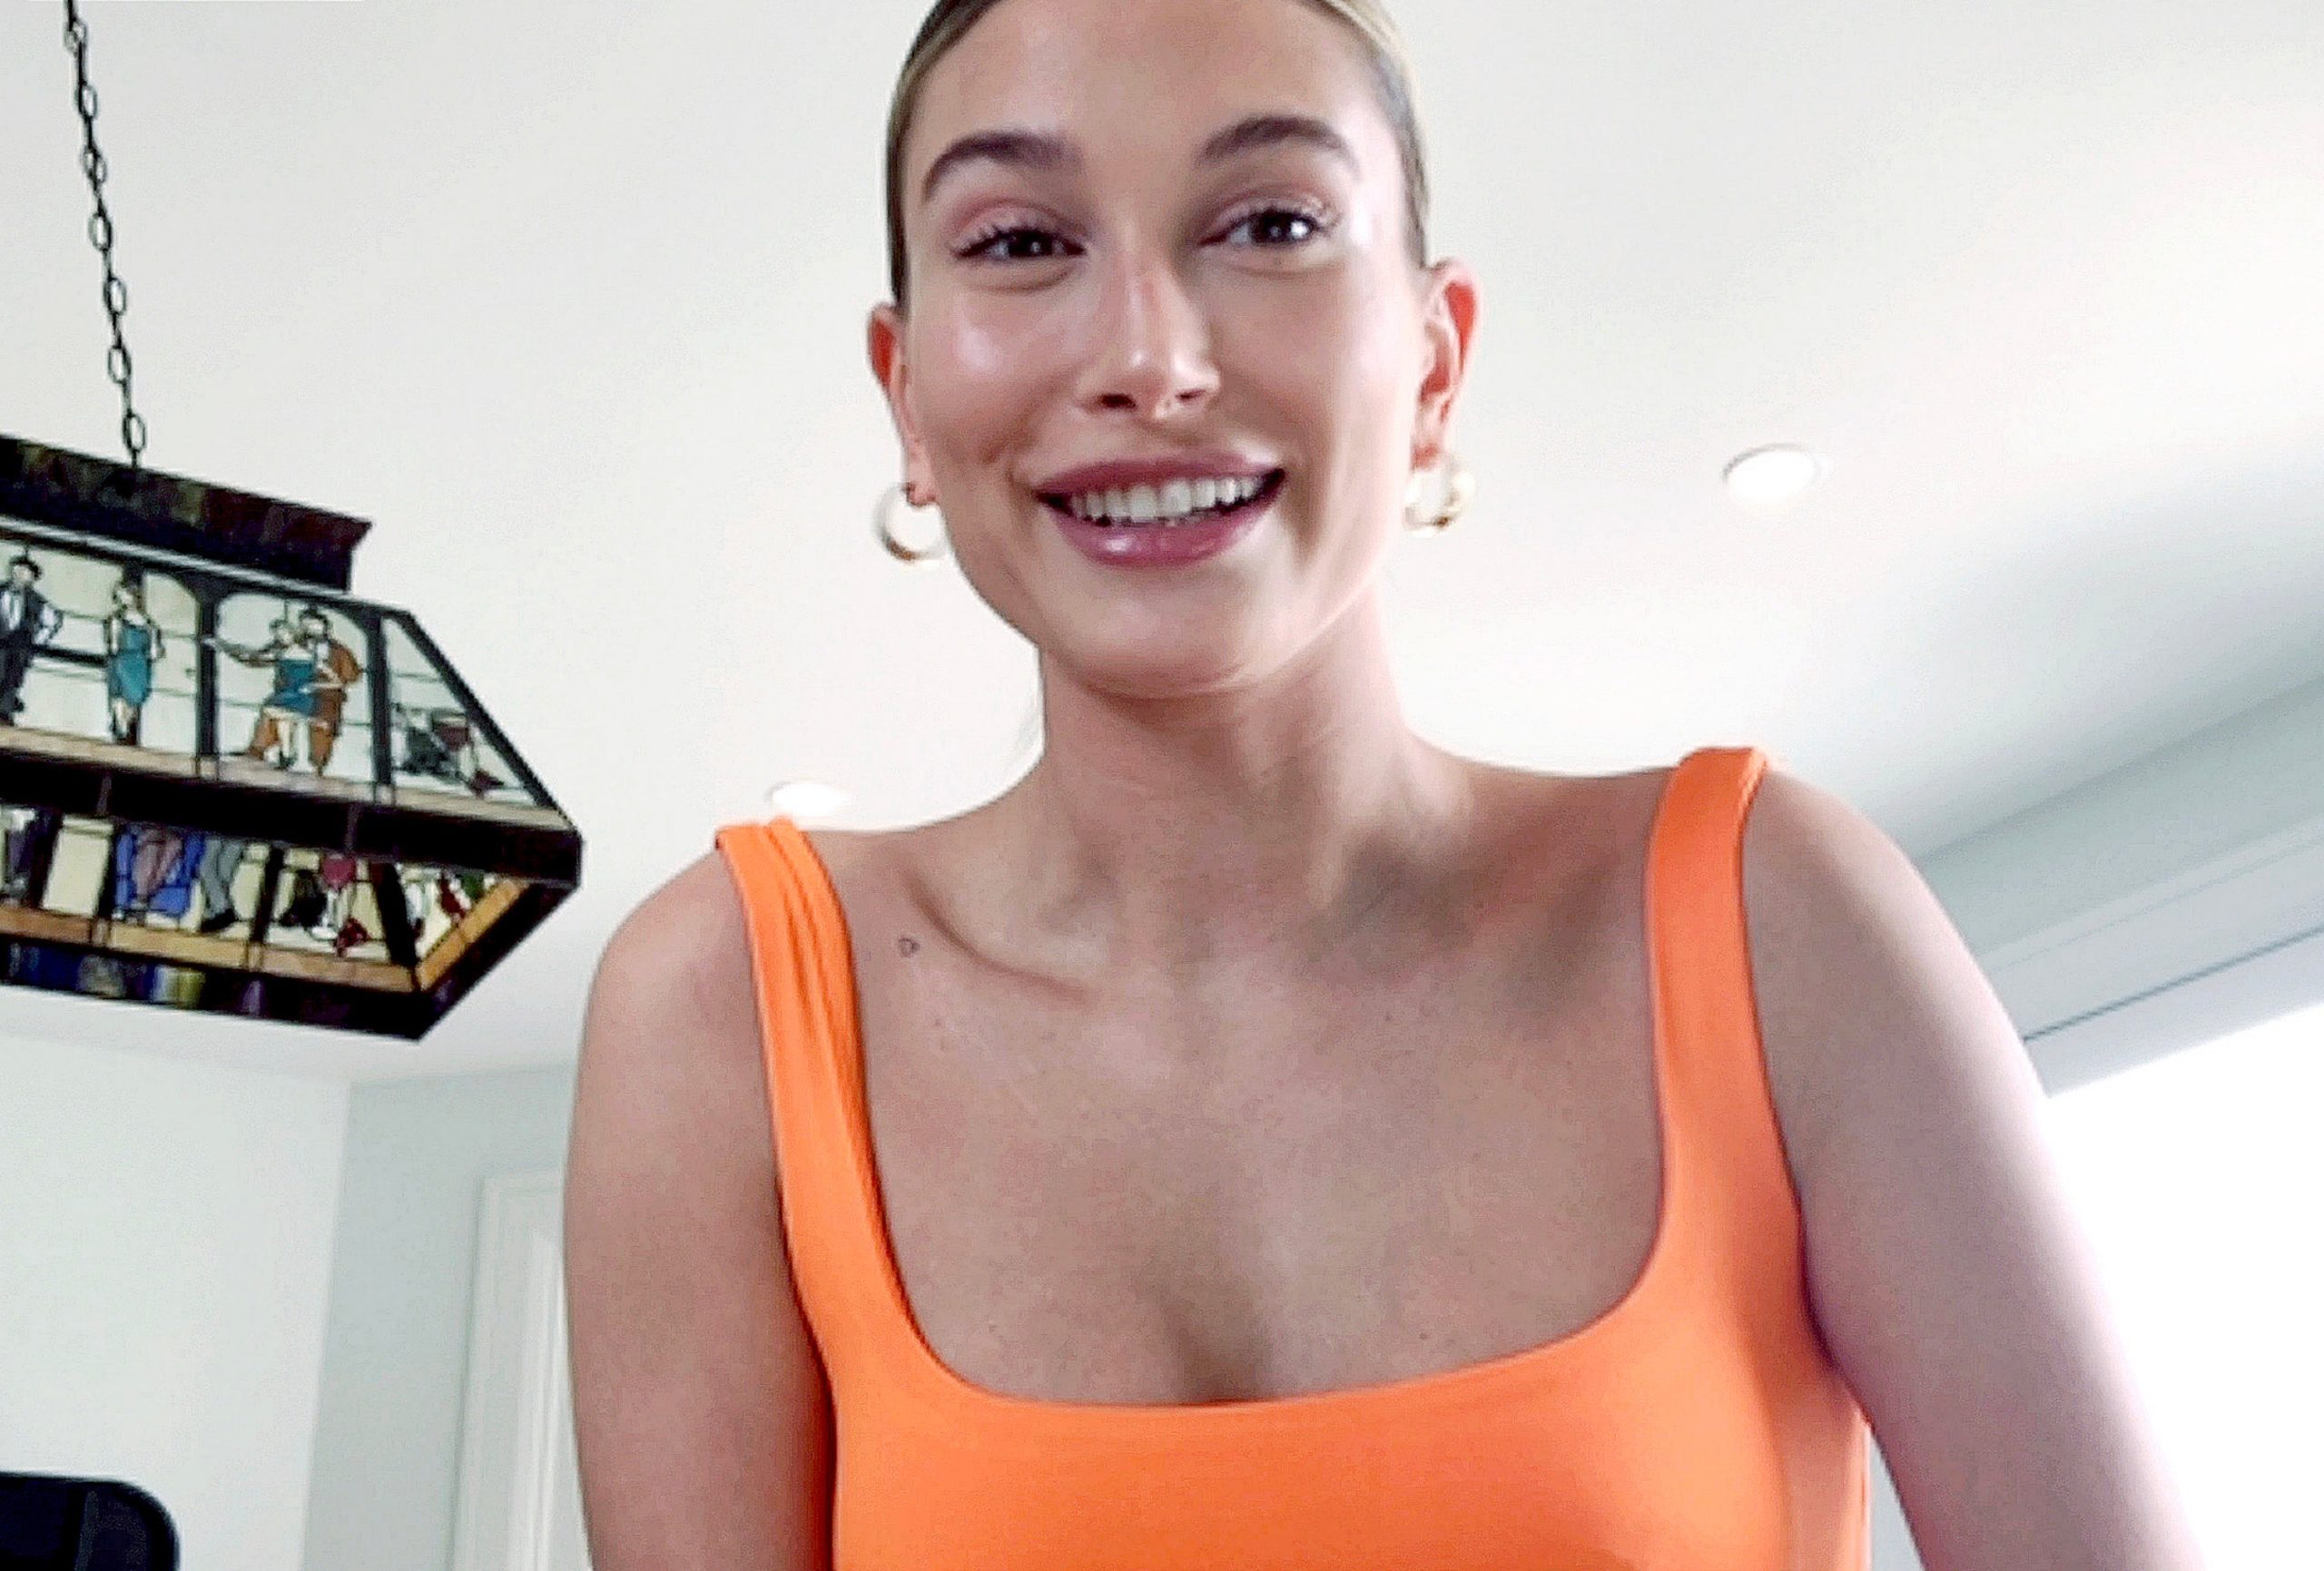 Hailey Bieber Shares Makeup and Skin-Care Routine During Pandemic